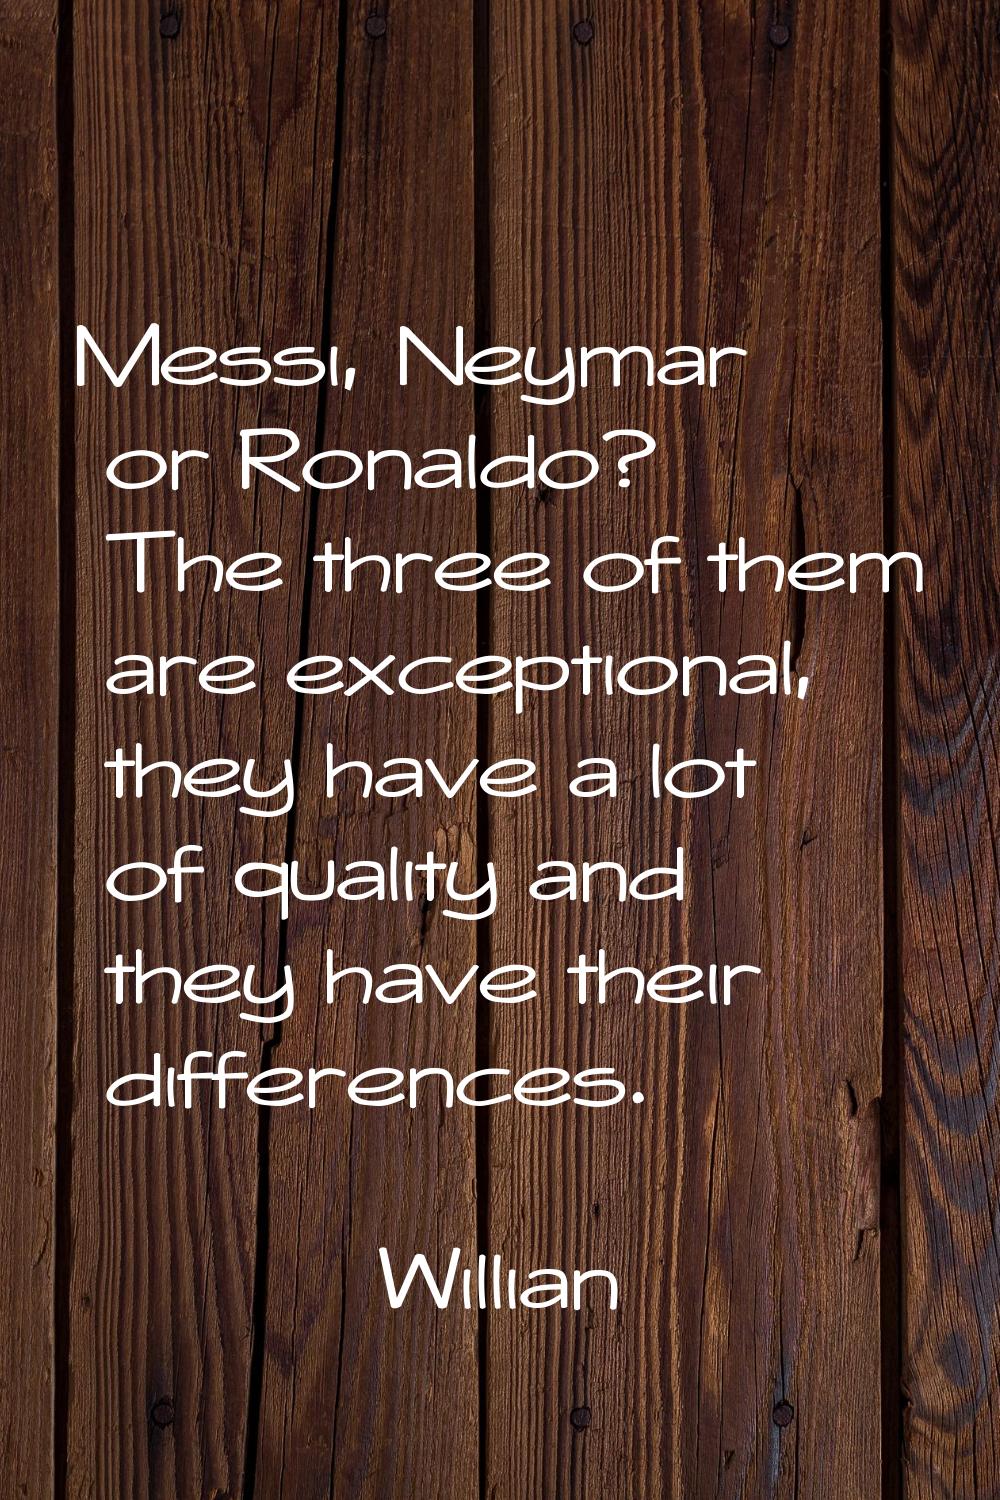 Messi, Neymar or Ronaldo? The three of them are exceptional, they have a lot of quality and they ha